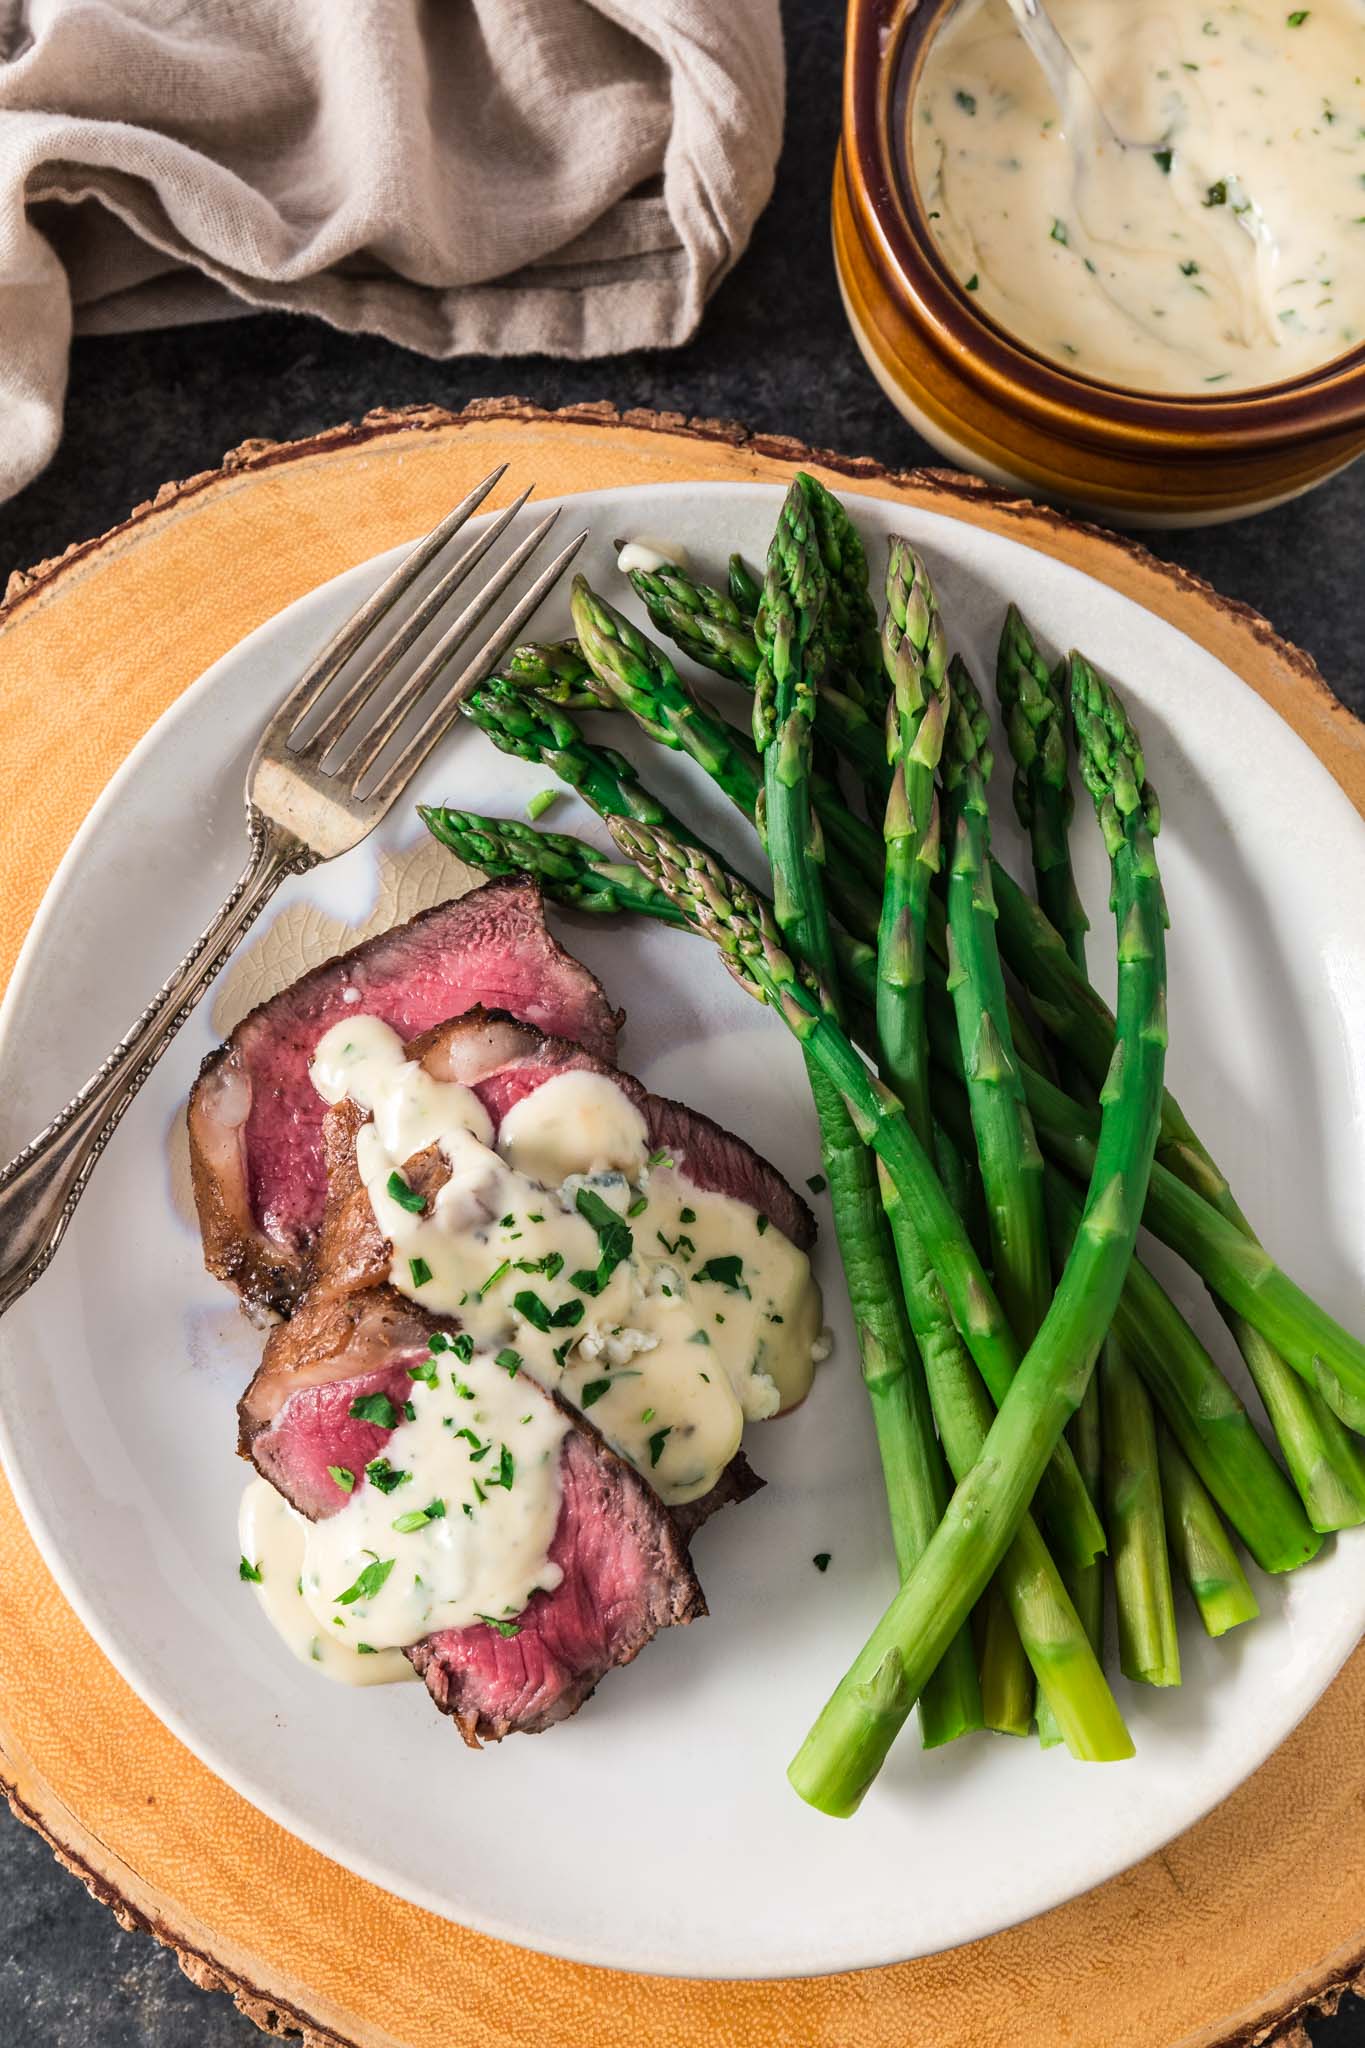 Pan Seared New York Strip Steak with Gorgonzola Sauce | www.oliviascuisine.com | No need to go to a steakhouse to enjoy a juicy New York Strip Steak, cooked to perfection. Follow my tips and you can make a superb steak dinner right at home, on your stove, in less than 30 minutes! The buttery Gorgonzola Cream Sauce is optional, but you'd be crazy to skip it. (Recipe and food photography by @oliviascuisine.)